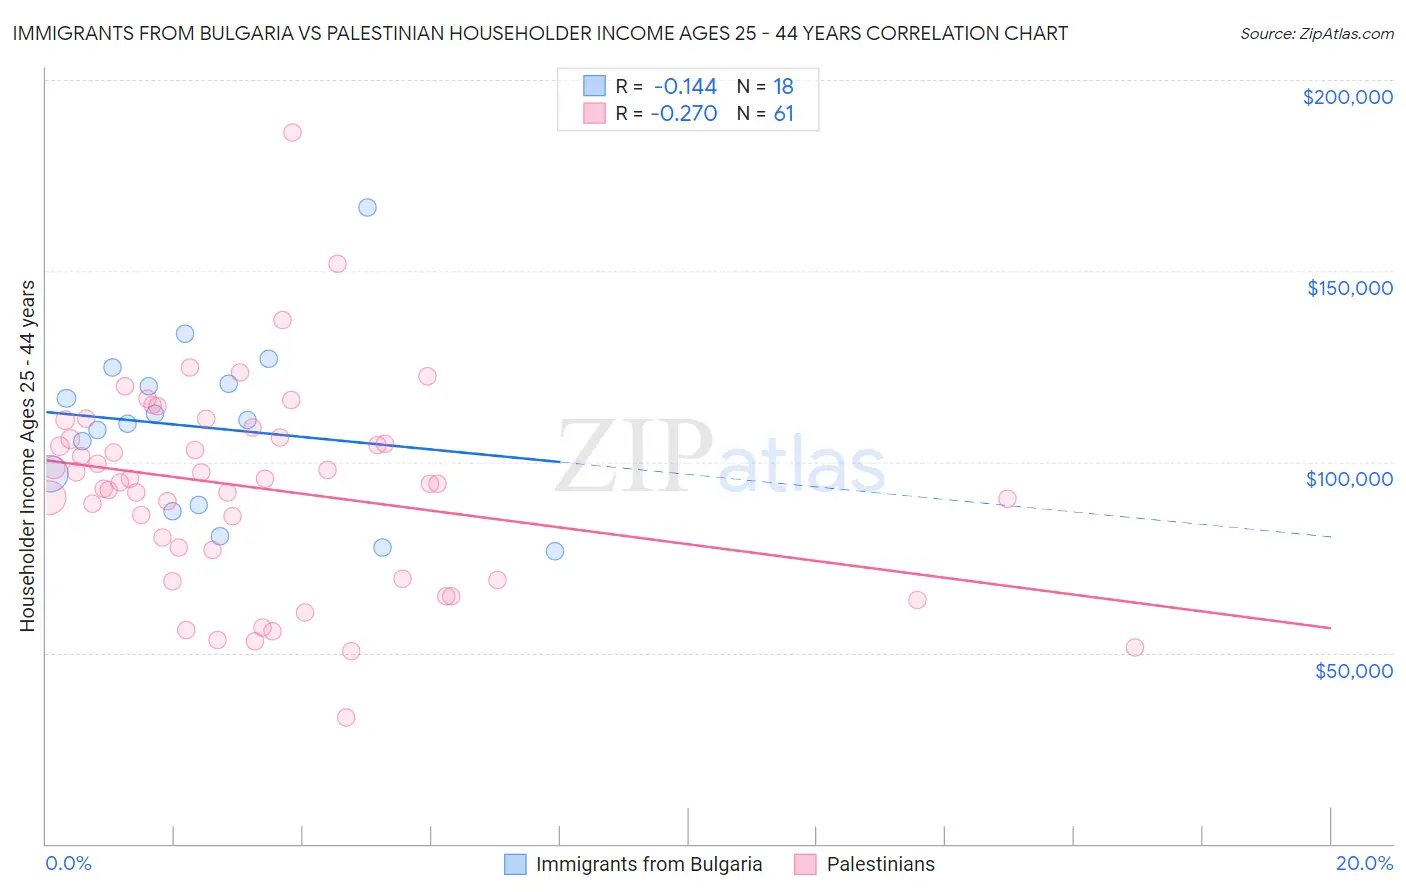 Immigrants from Bulgaria vs Palestinian Householder Income Ages 25 - 44 years